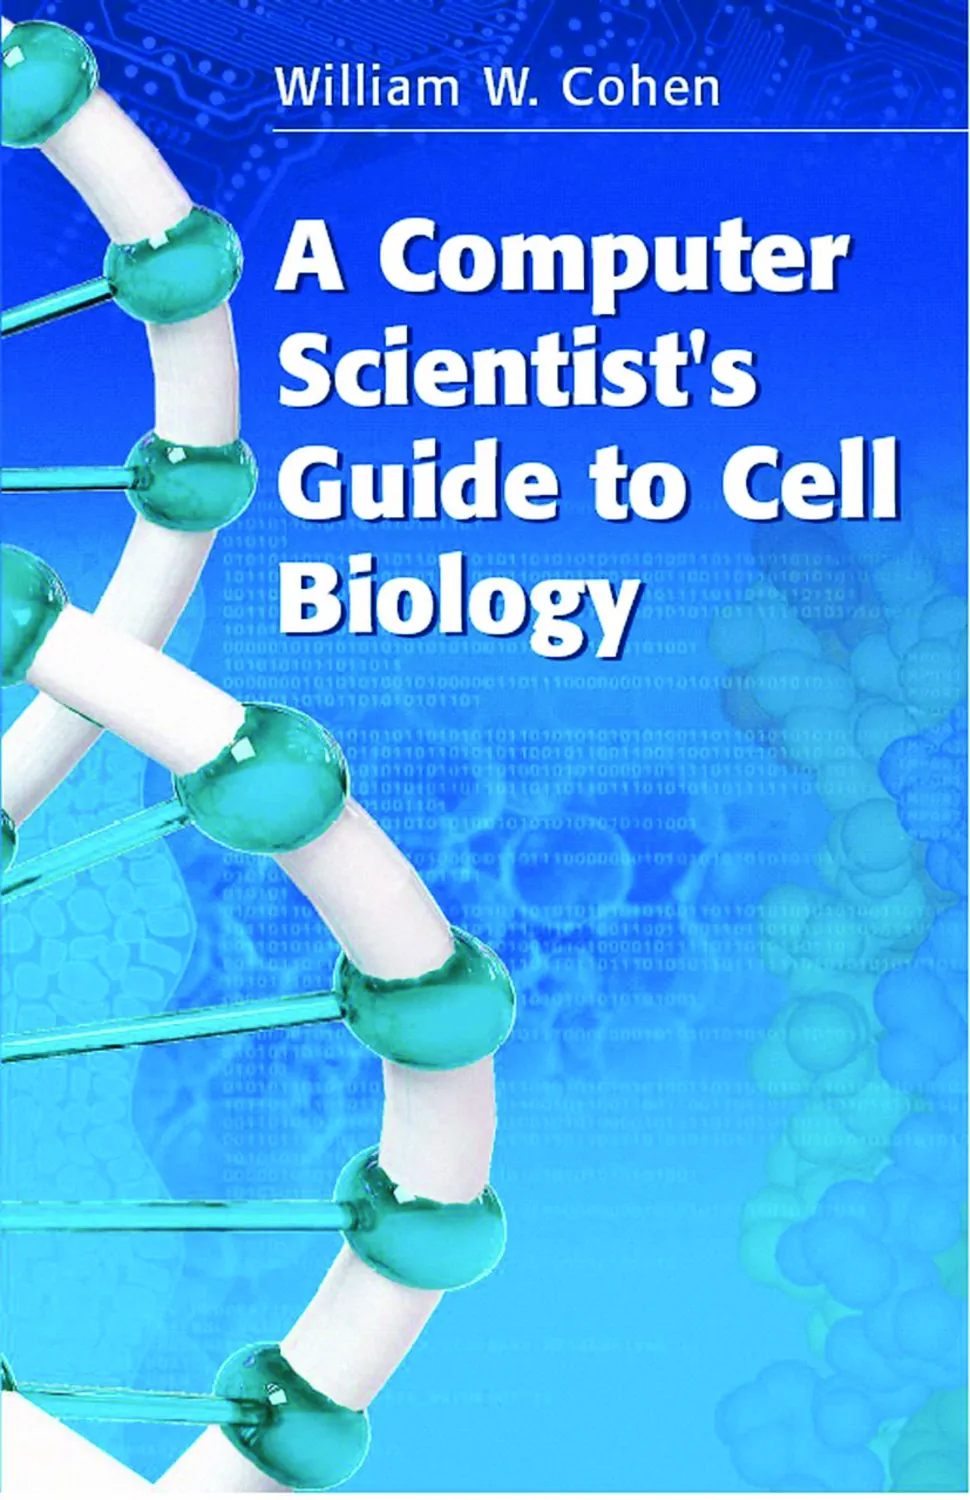 A Computer Scientist's Guide To Cell Biology